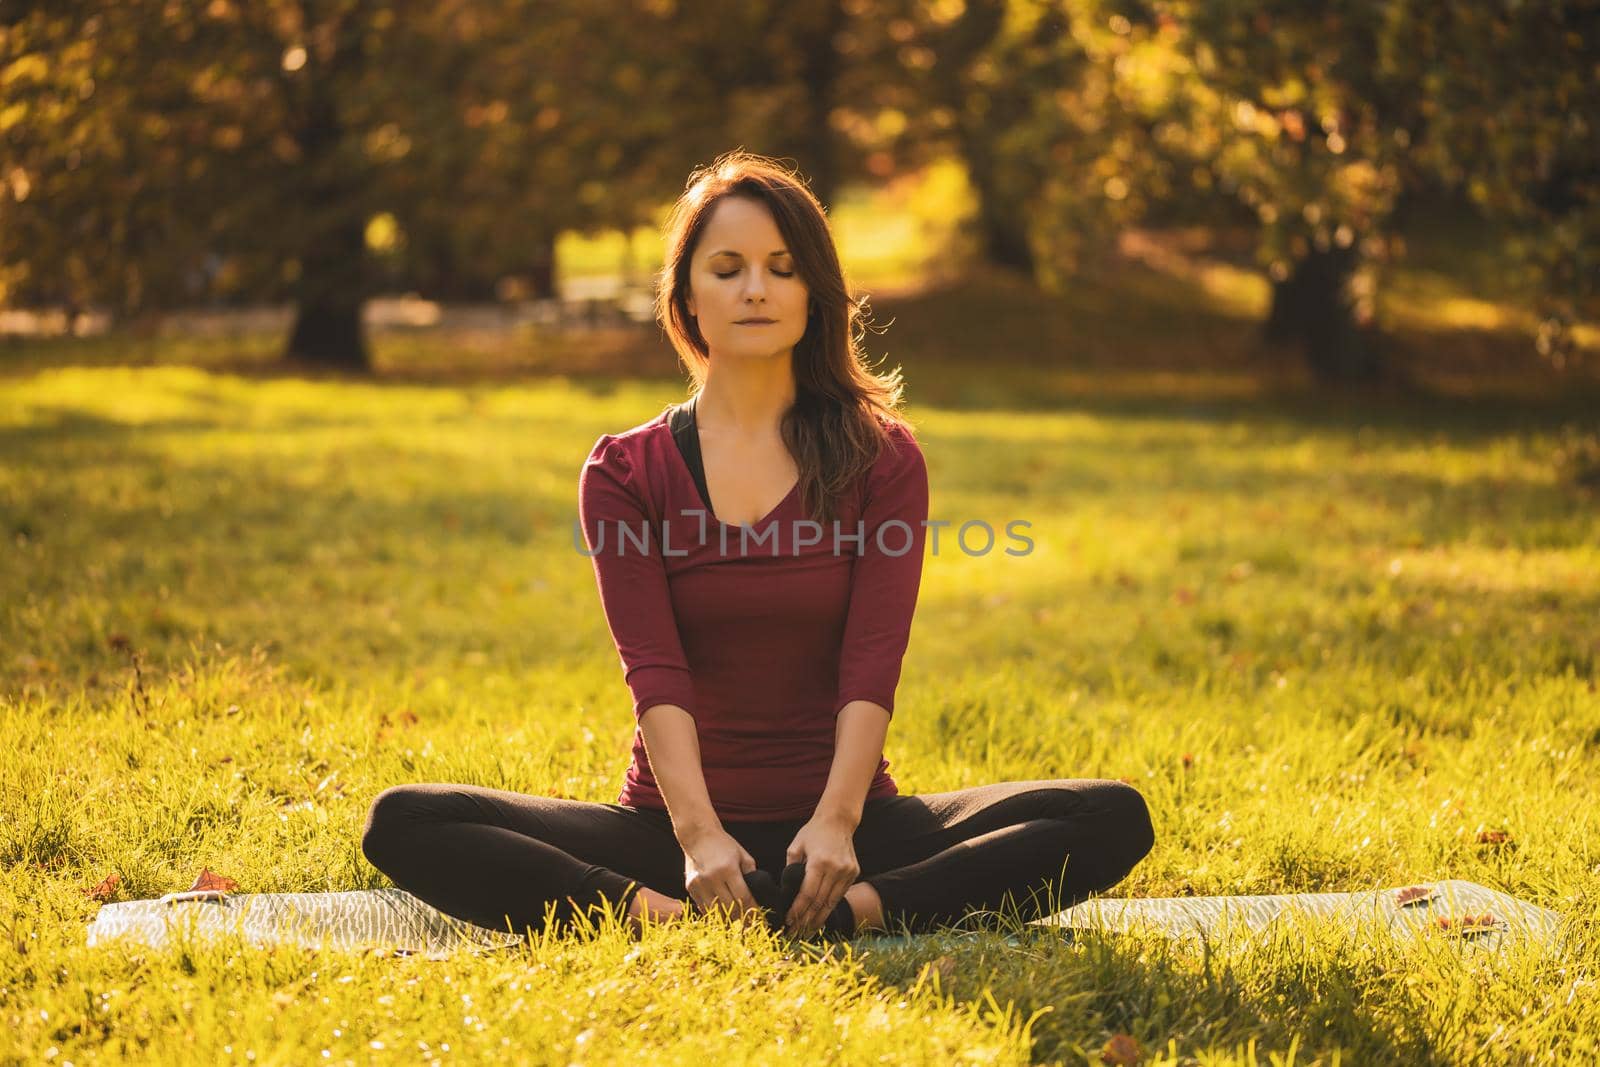 Beautiful woman sitting in lotus position and meditating in the nature,Padmasana/Lotus position.